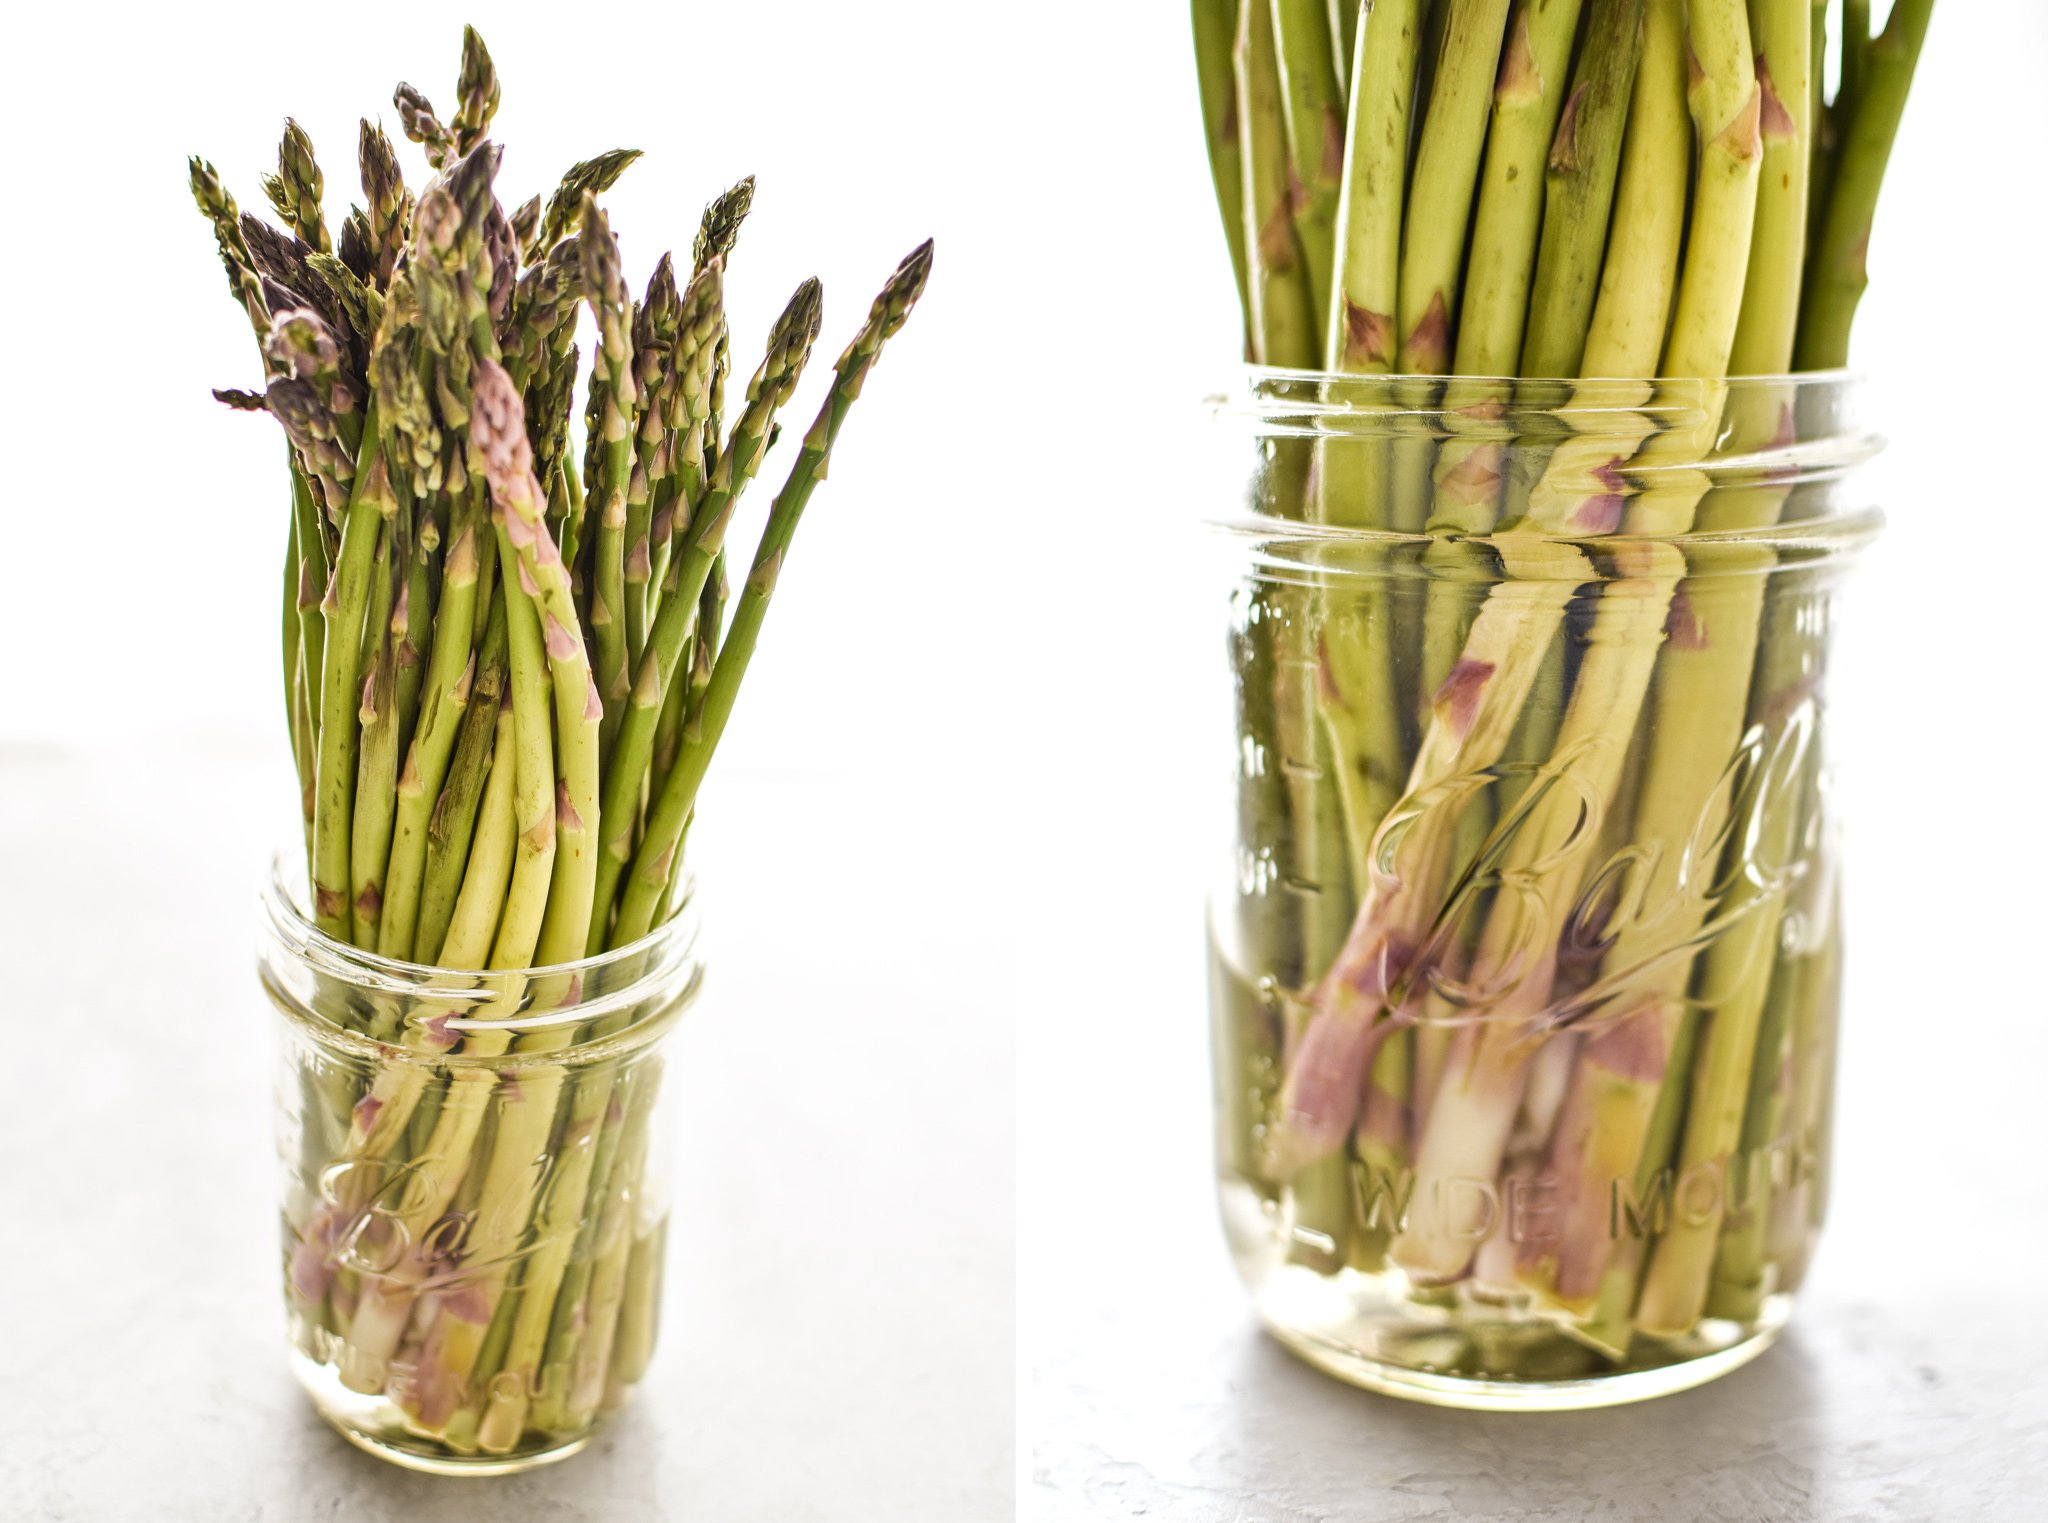 Asparagus spears in some water in a mason jar to keep them fresh.